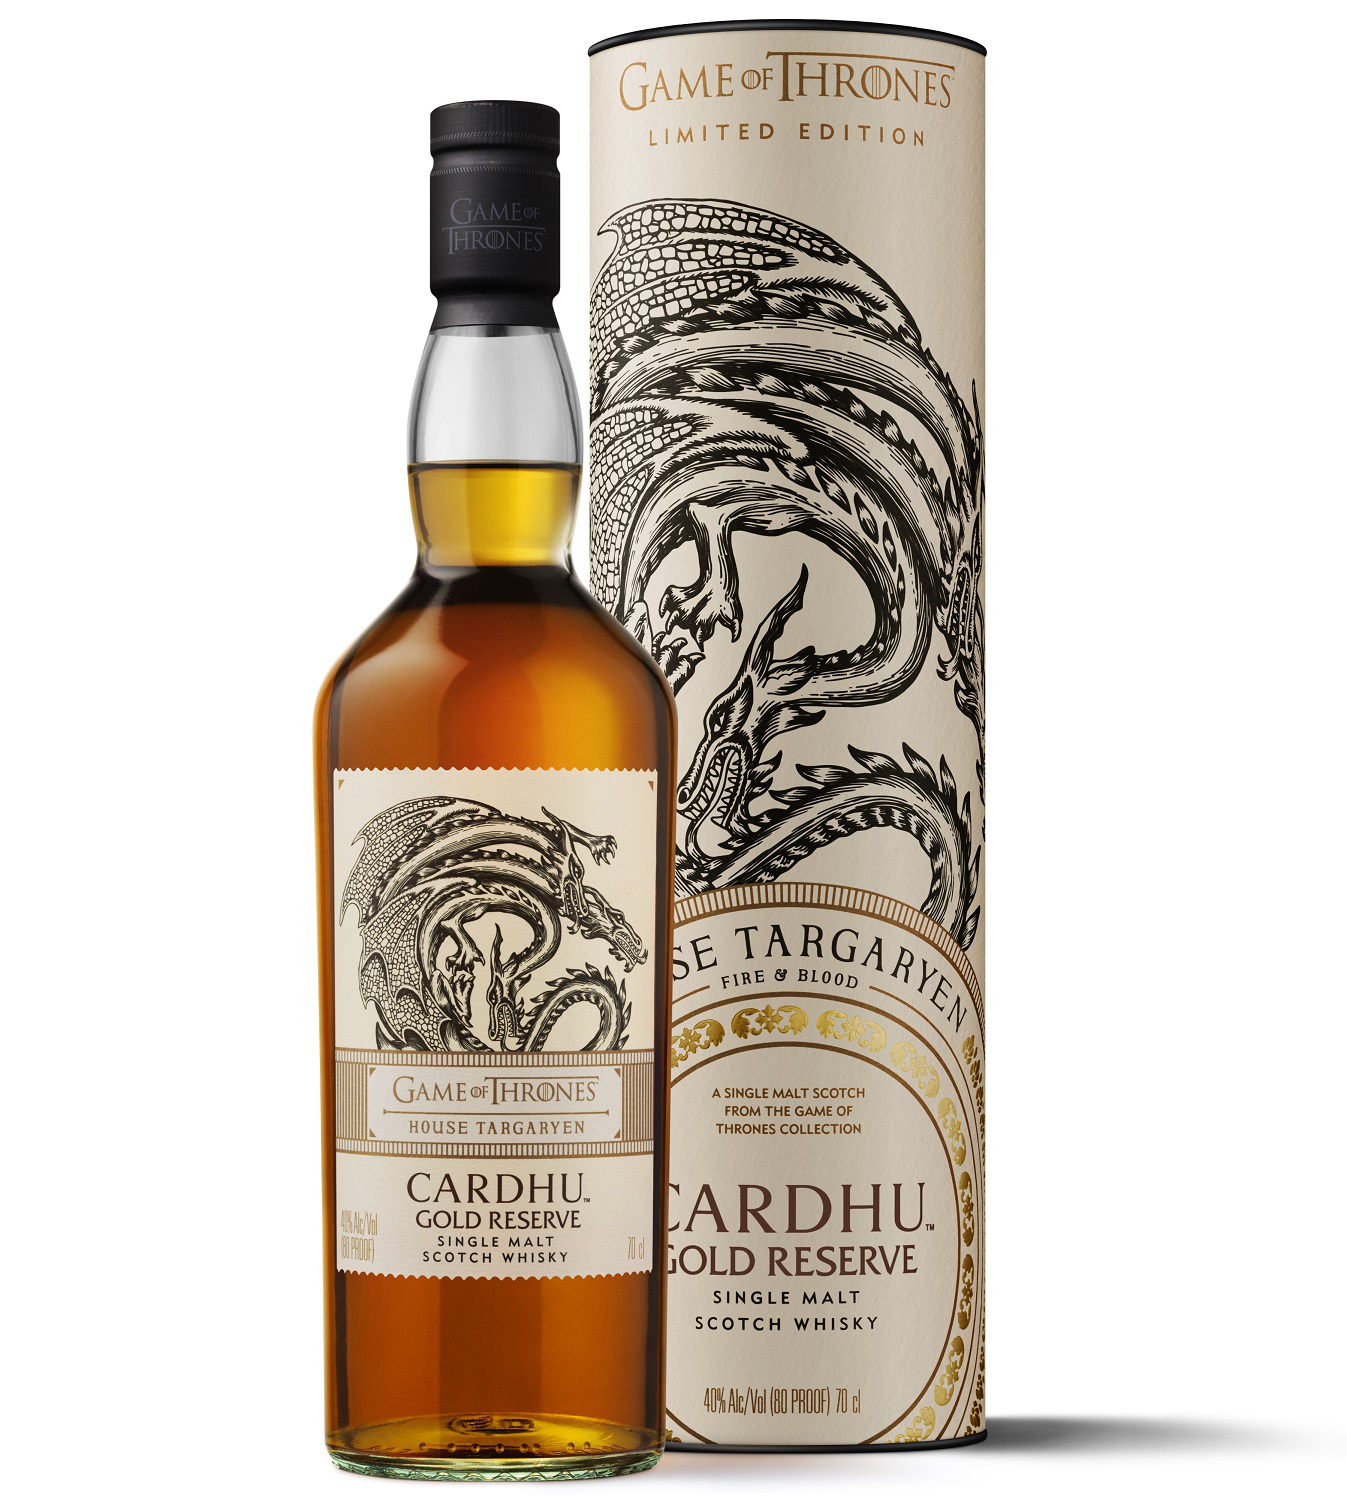 Cardhu Gold Reserve Game of Thrones Whisky